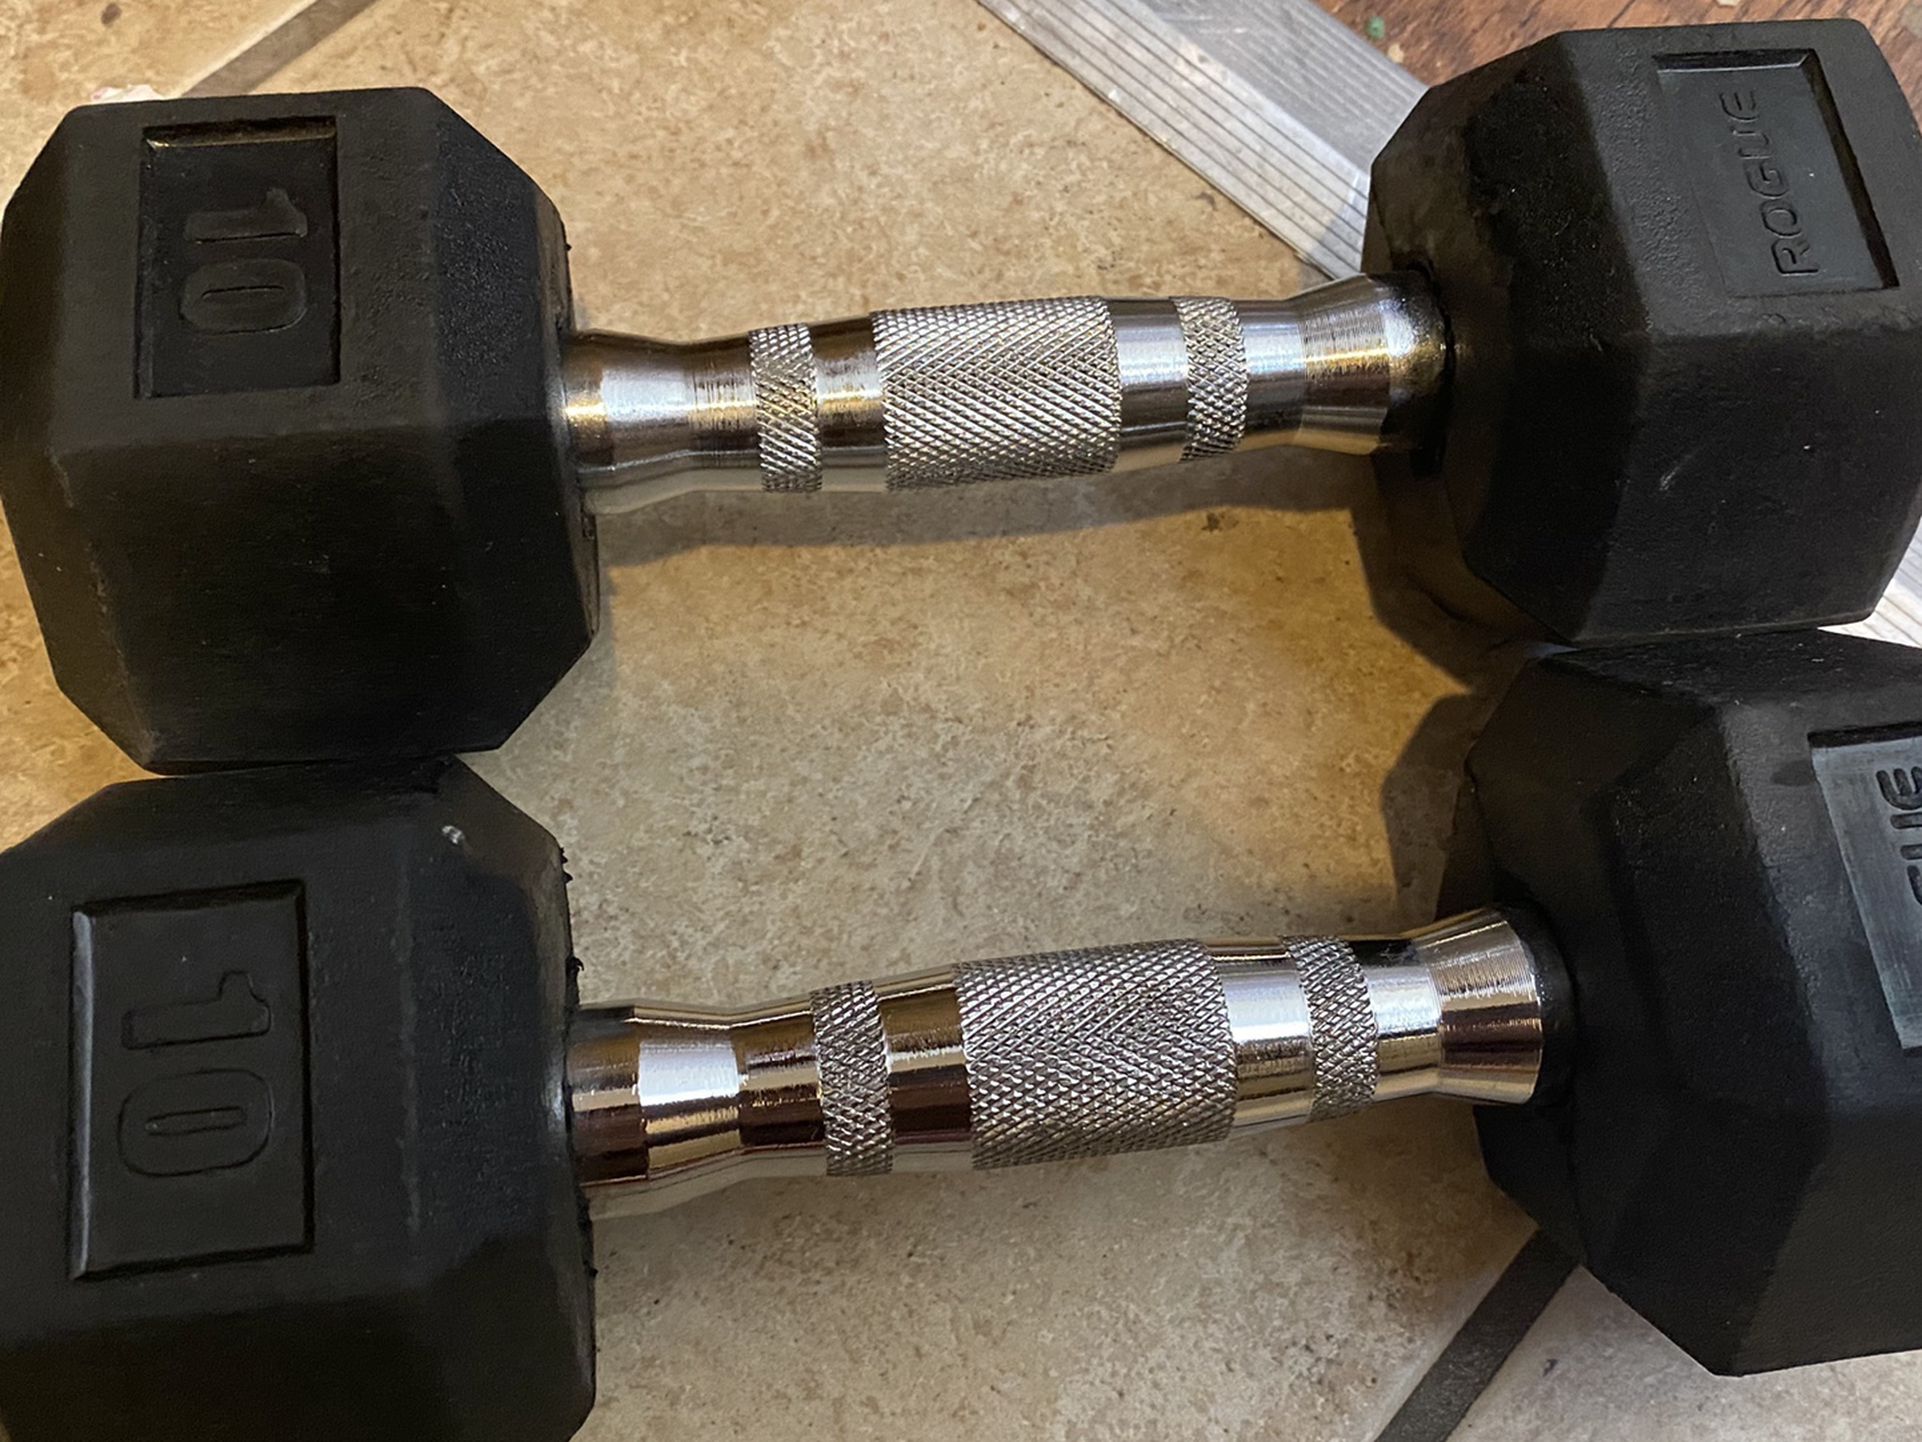 New, pair of Rogue 10lb rubber hex dumbbell